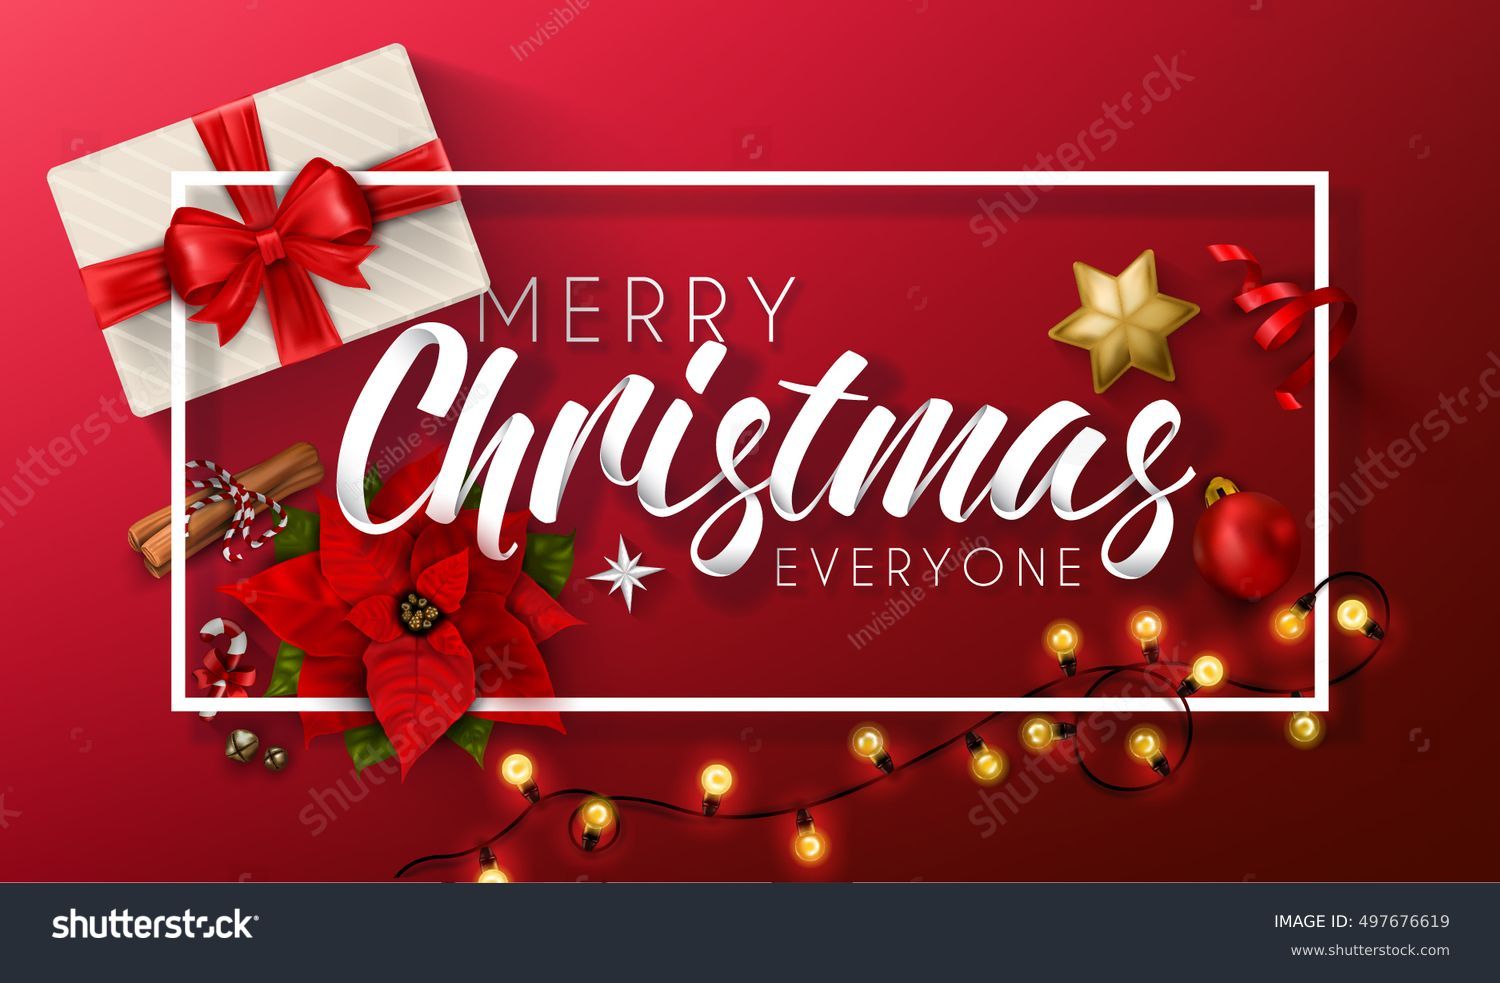 Merry Christmas Everyone Vintage Background Typography Stock Vector Royalty Free 497676619